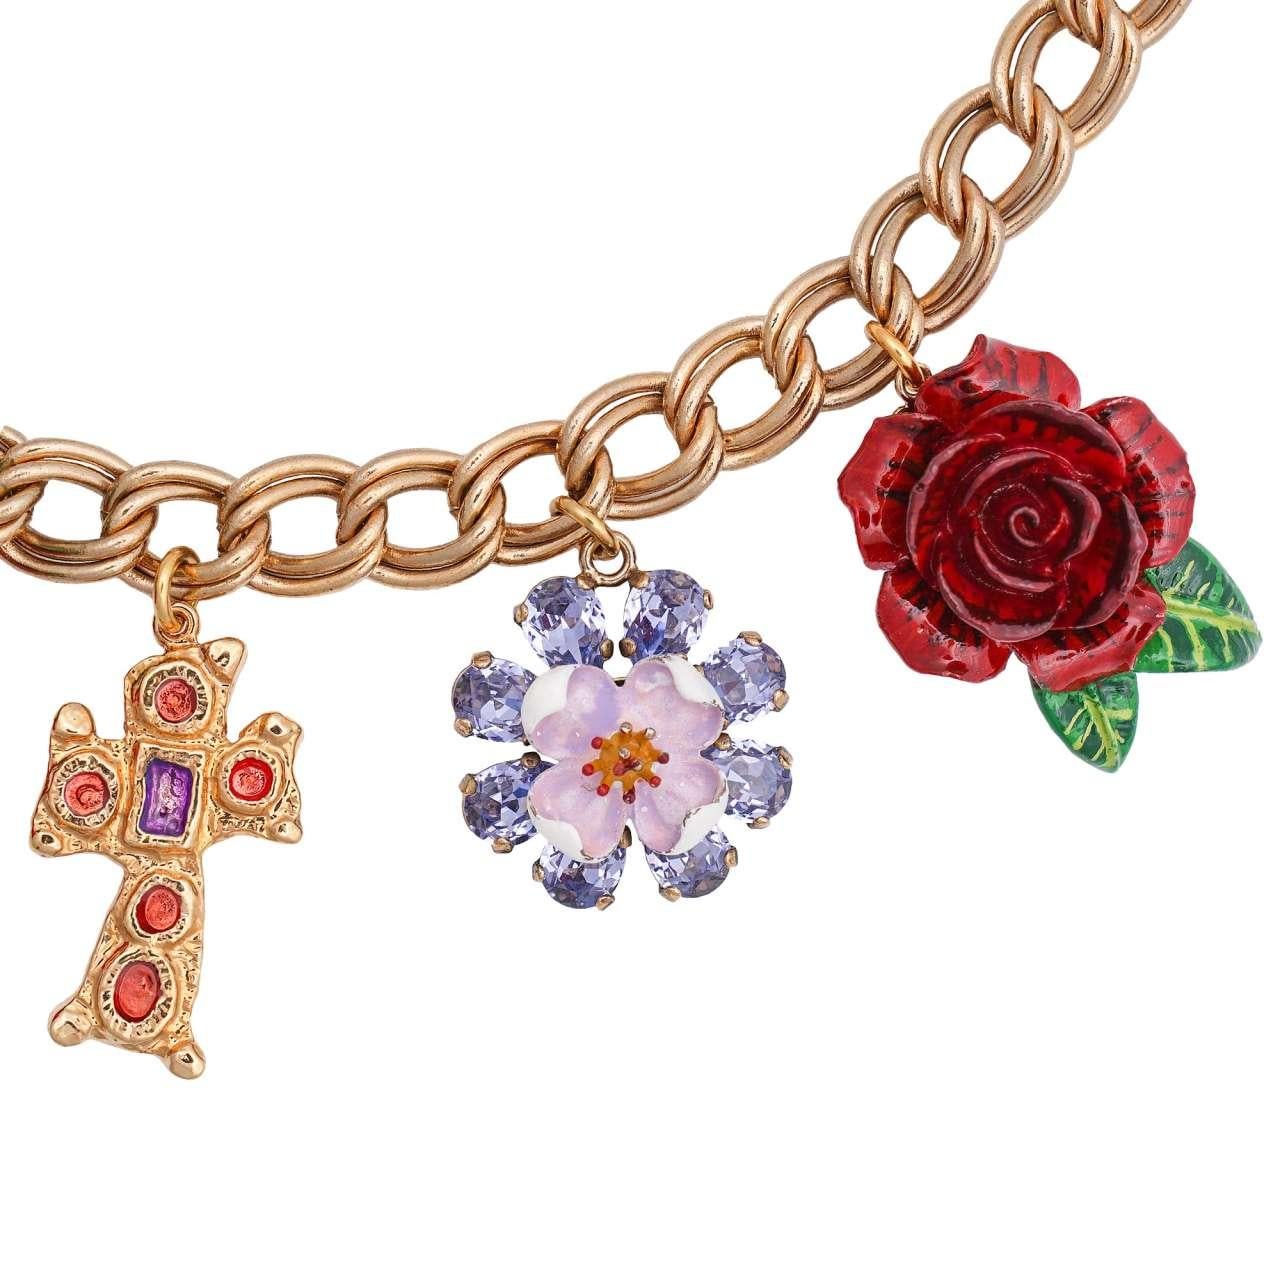 - Chocker necklace with colorful crystals, cross, star, strawberry, rose and cherry flowers in gold by DOLCE & GABBANA - RUNWAY - Dolce & Gabbana Fashion Show - Former RRP 1.299 EUR - New with Box - Made in Italy - Nickel free - Model: